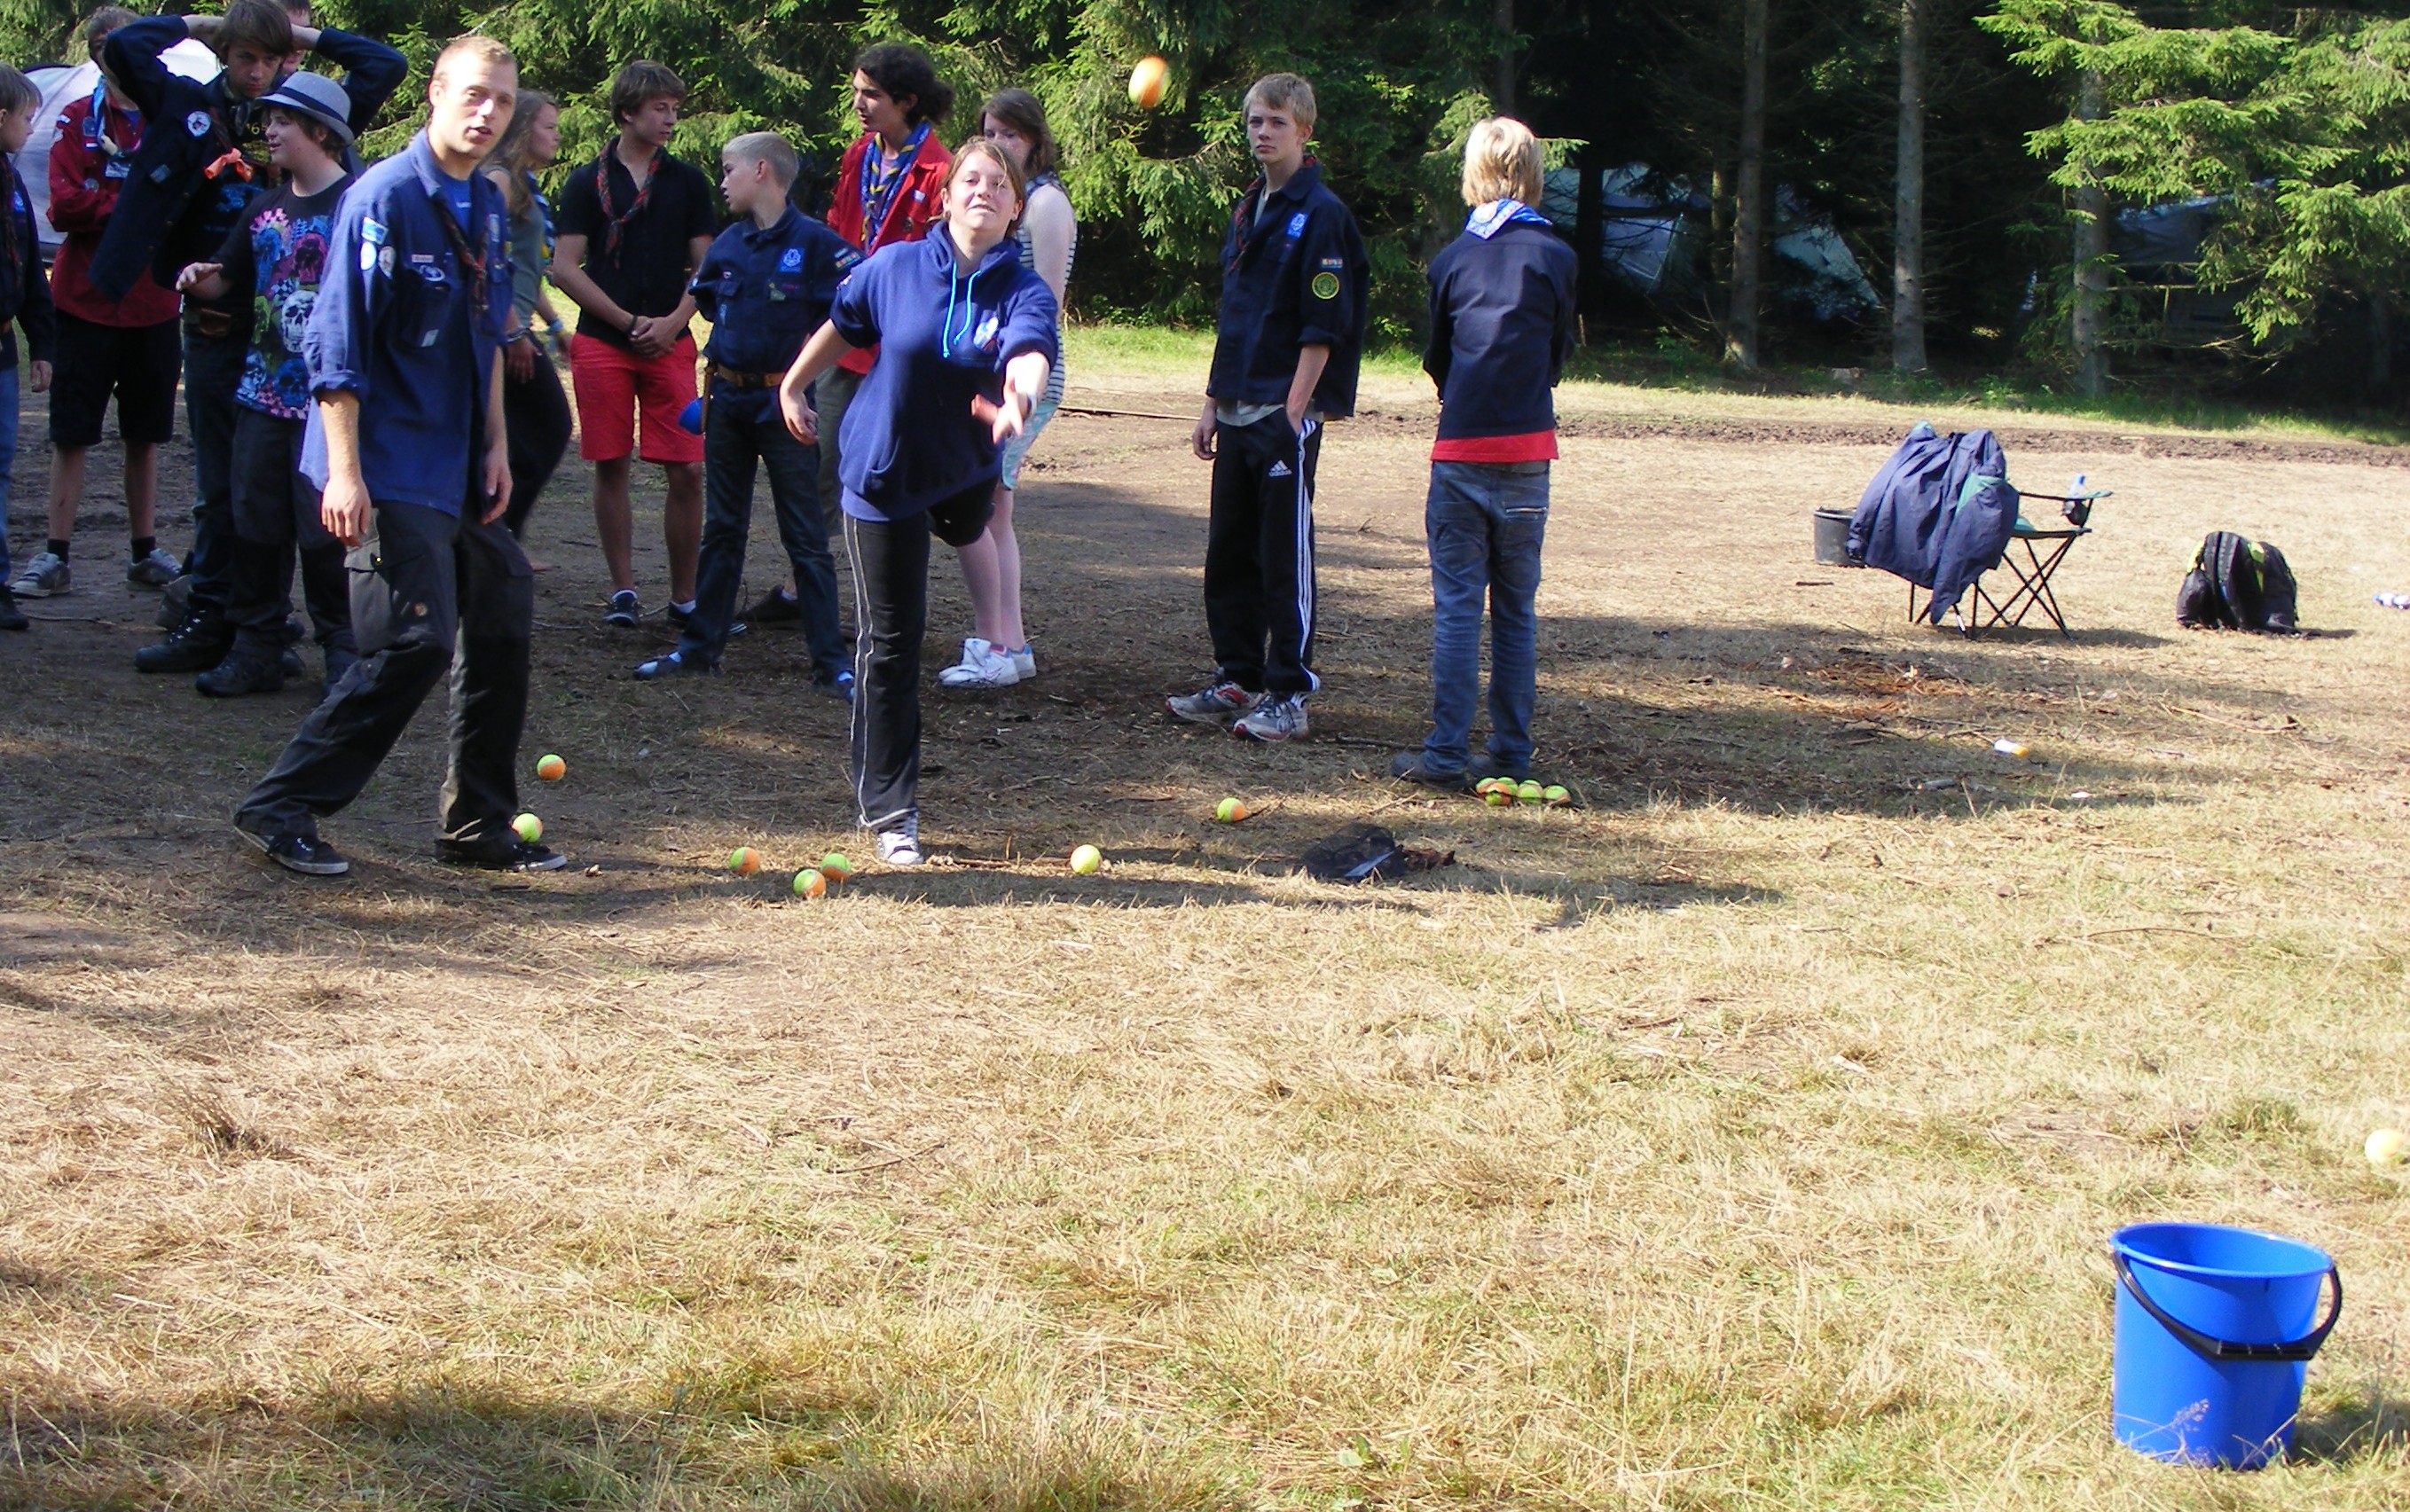 AT IT GIRL_Assistant Patrol Leader Natalie throws a ball in a bucket, during the mini-Olympics event.